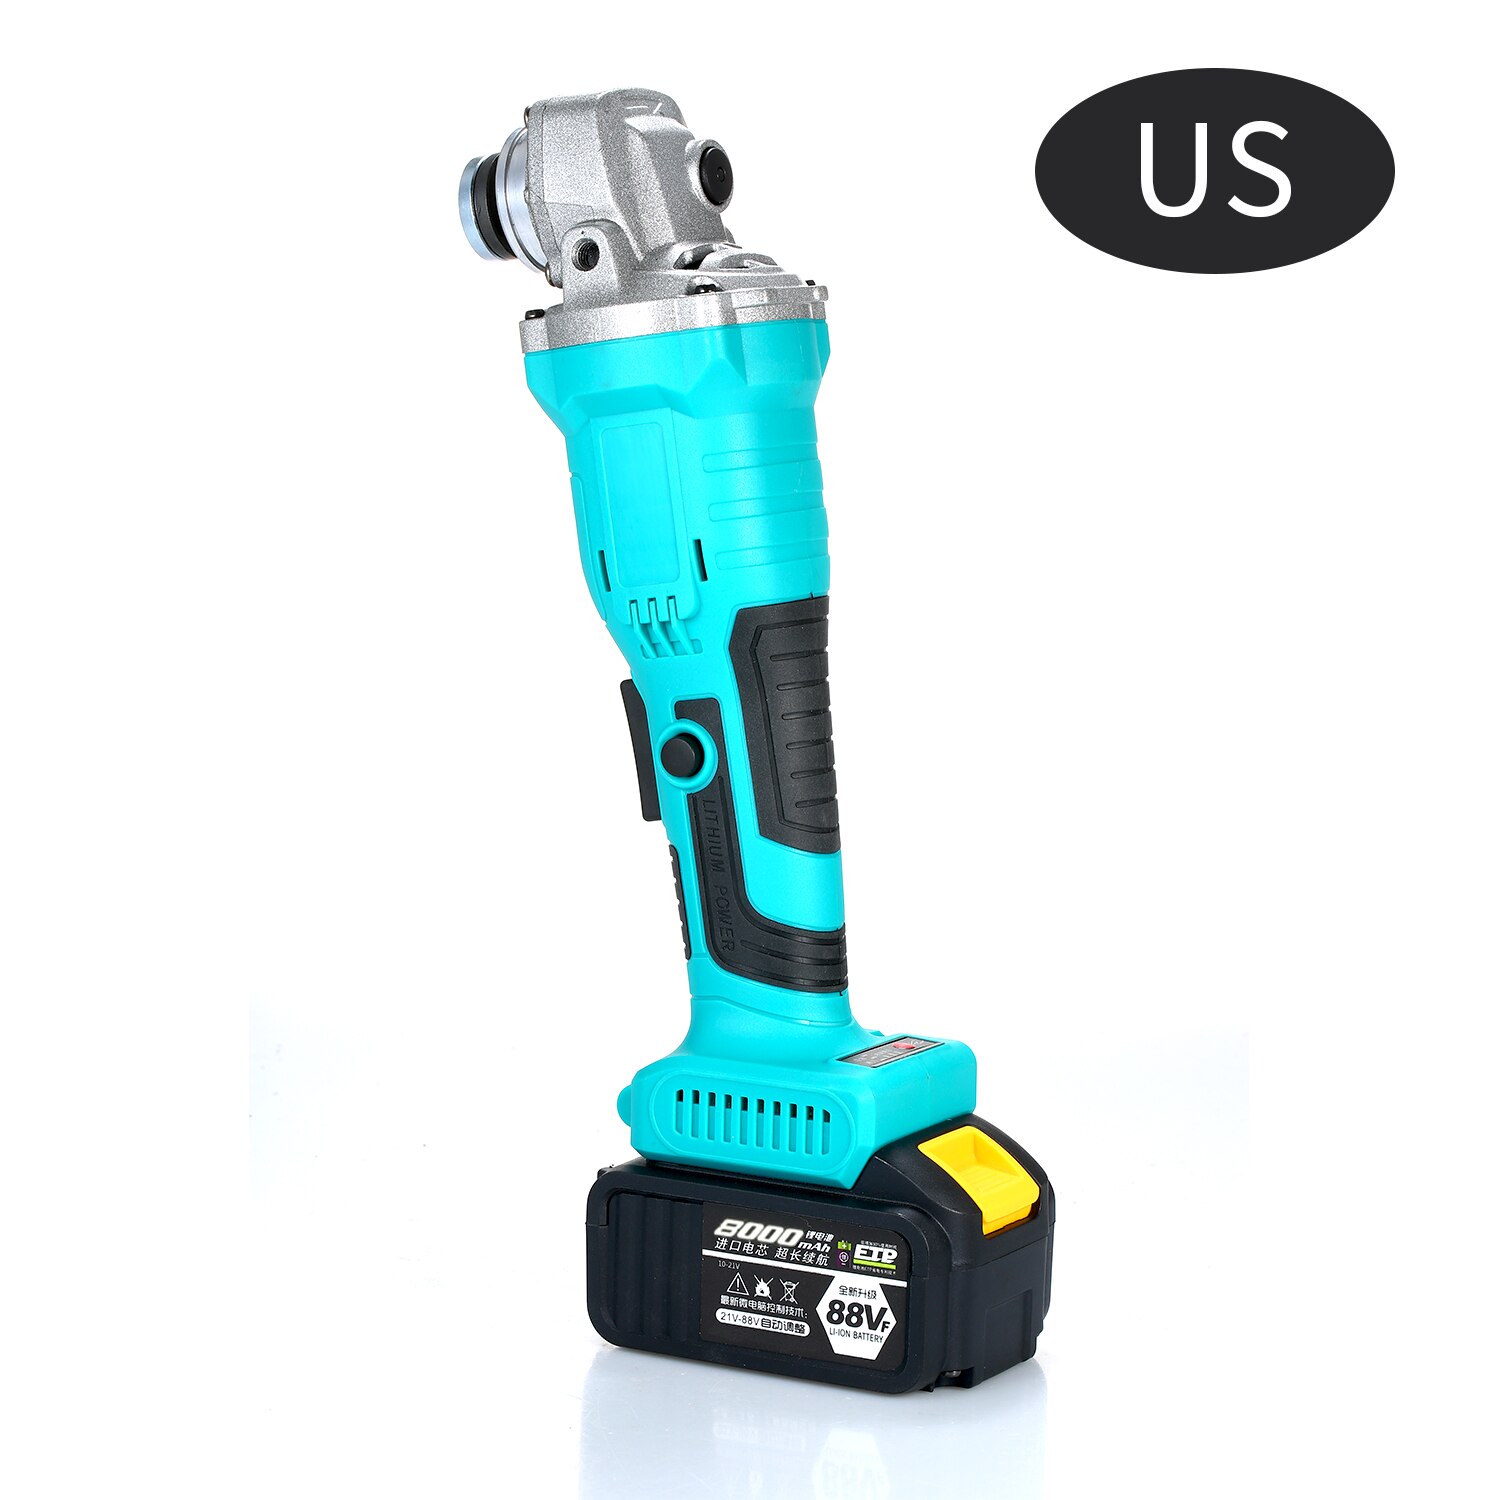 Angle Grinder Lithium Electric Brushless Rechargeable Electric Angle Grinder Household Polishing Machine Angular Grinder: Angle Grinder Set US